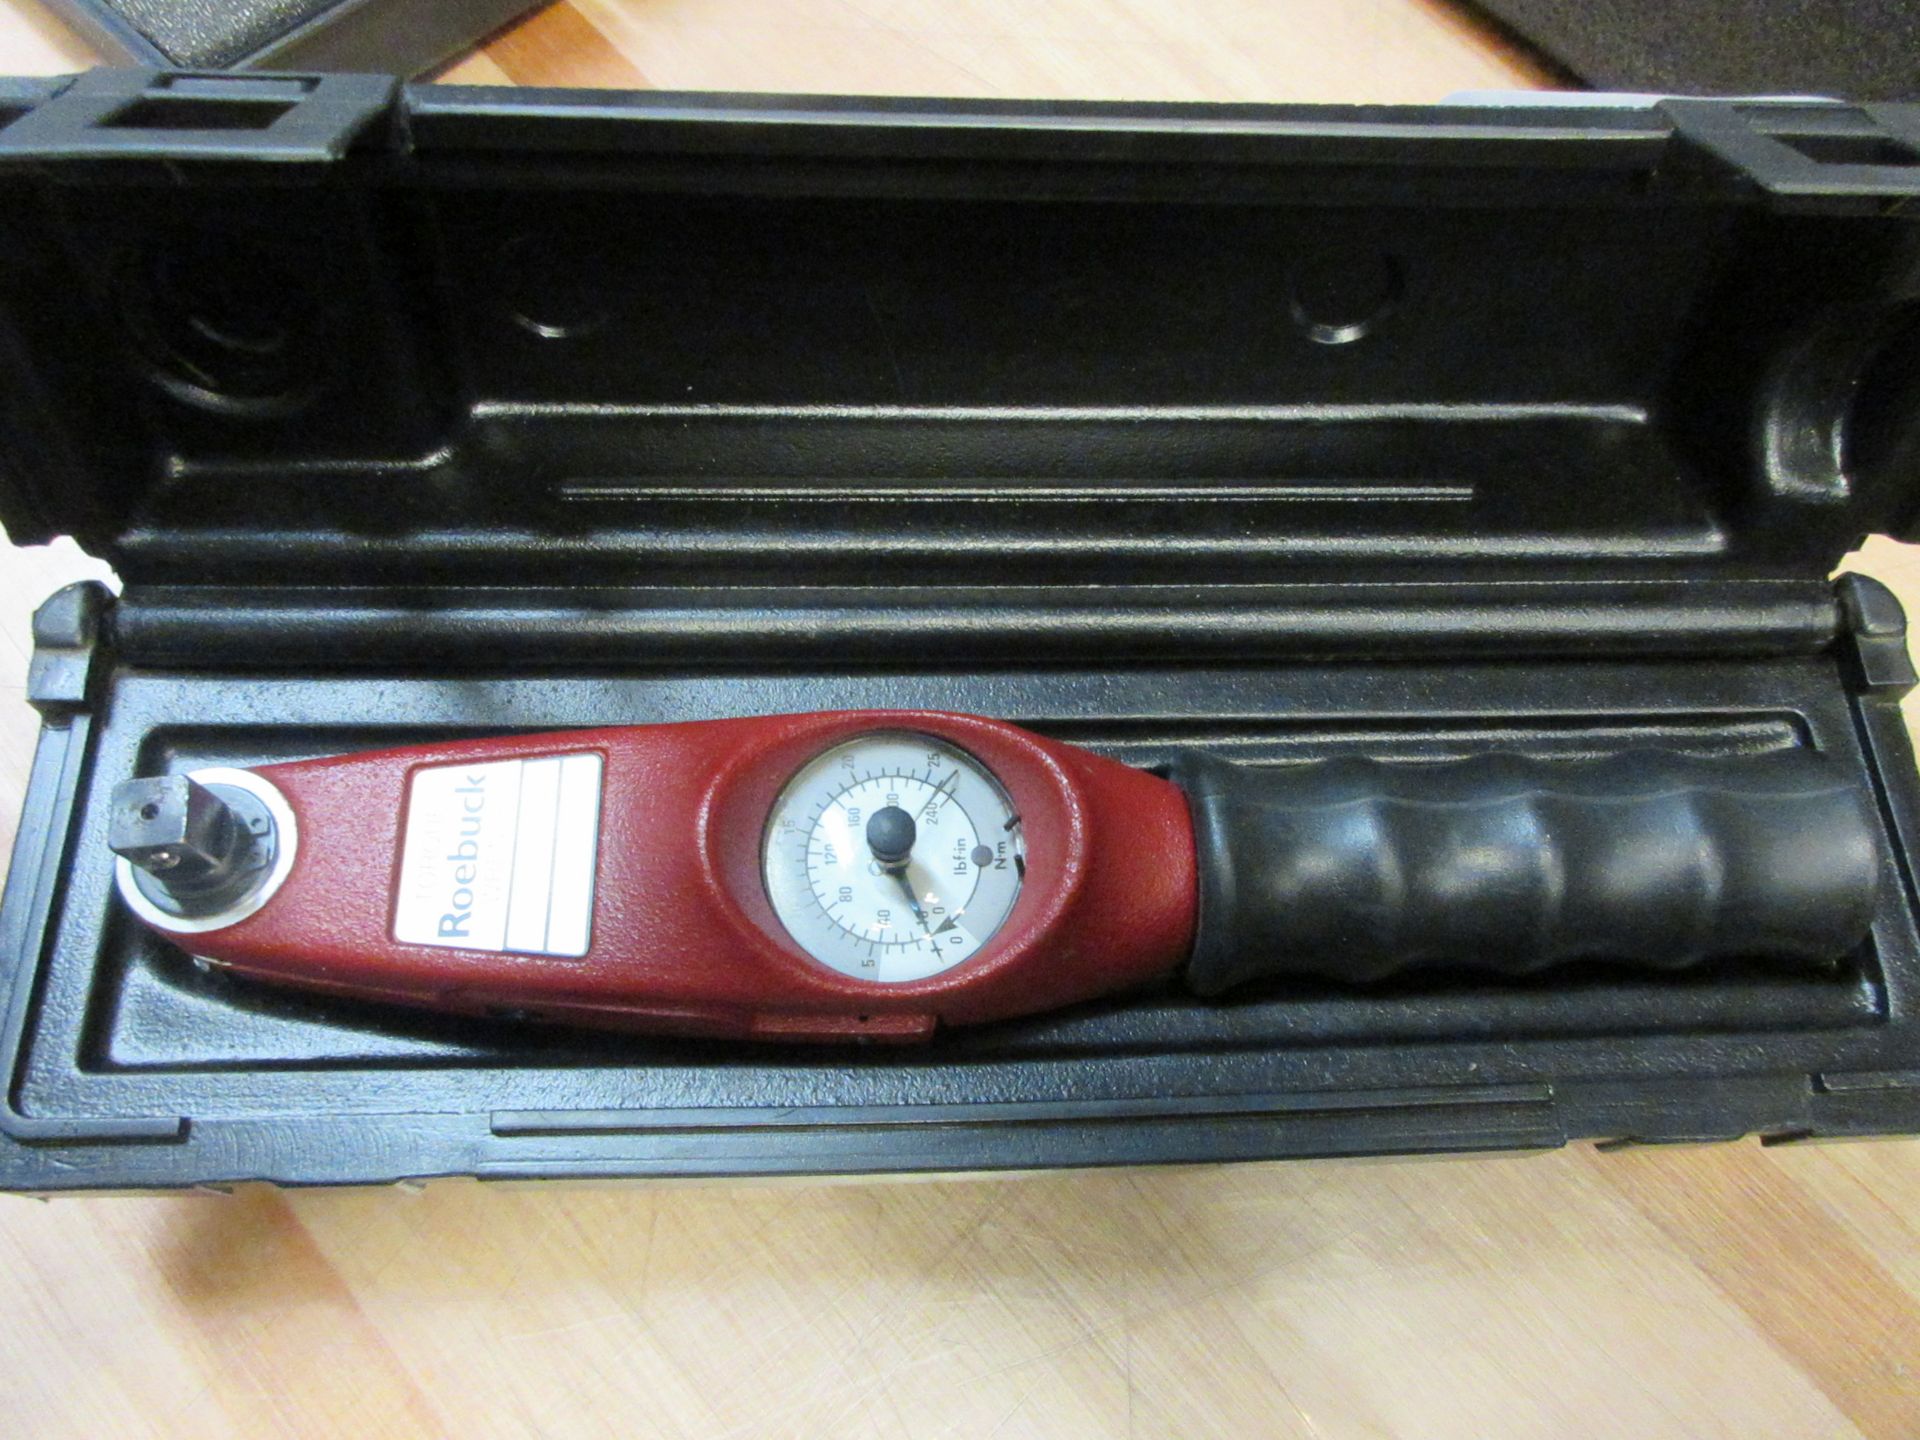 Roebuck dial indicating torque wrench